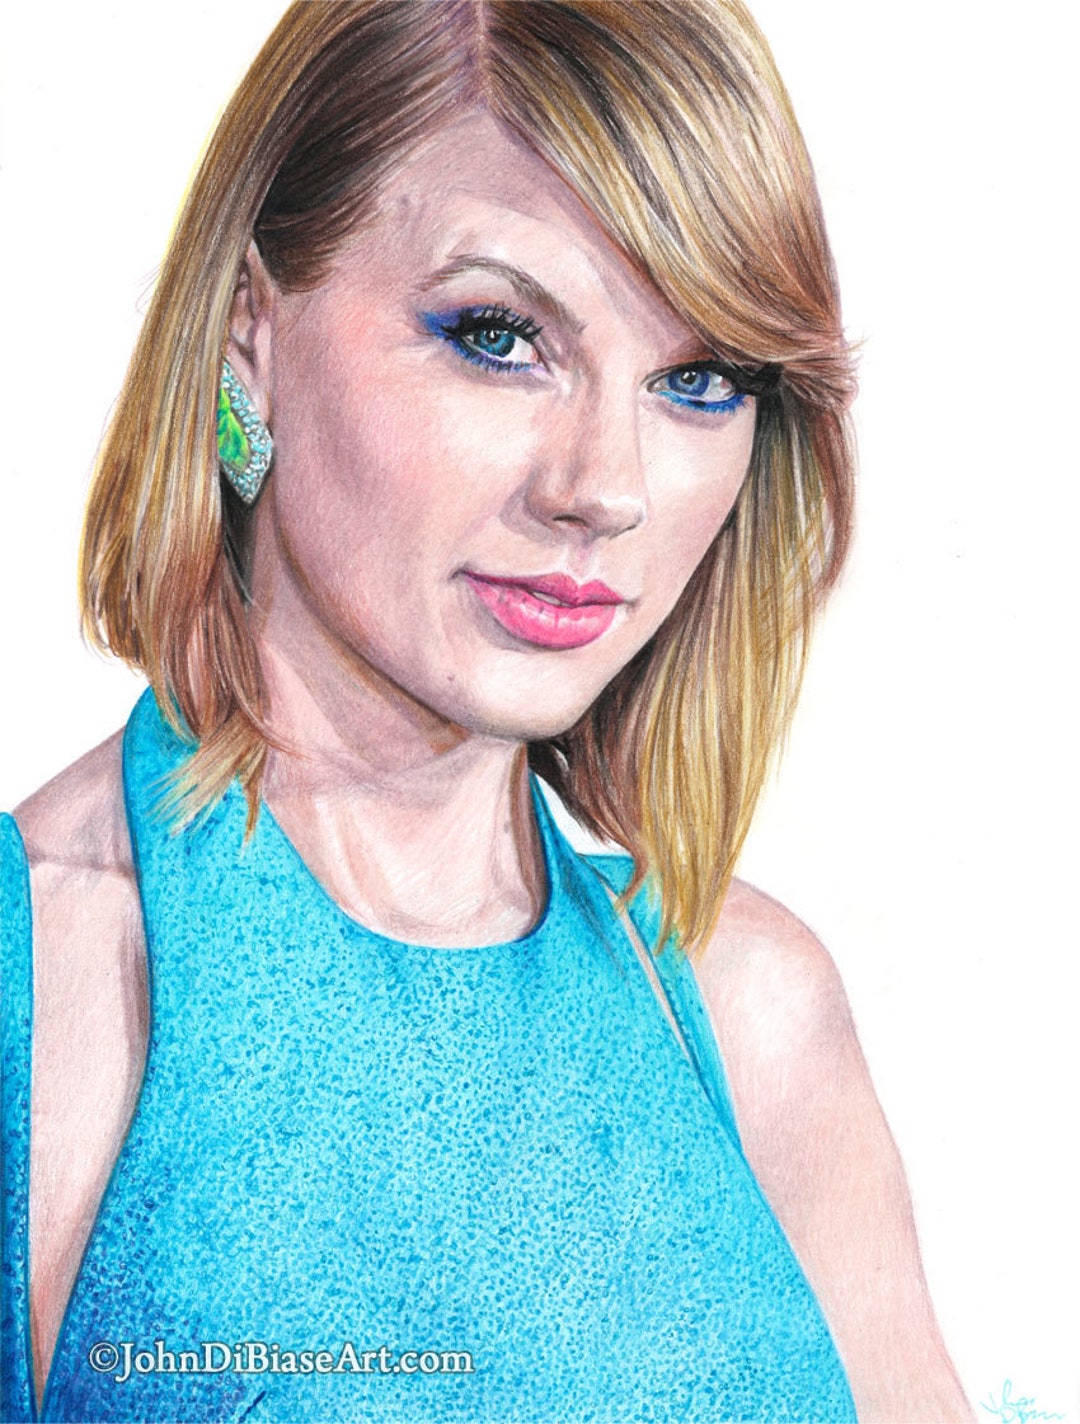 MaasArt  Heres my new drawing oftaylorswift  ive drawn taylor a few  times but had this one in the to draw folder for a while because i loved  her features in